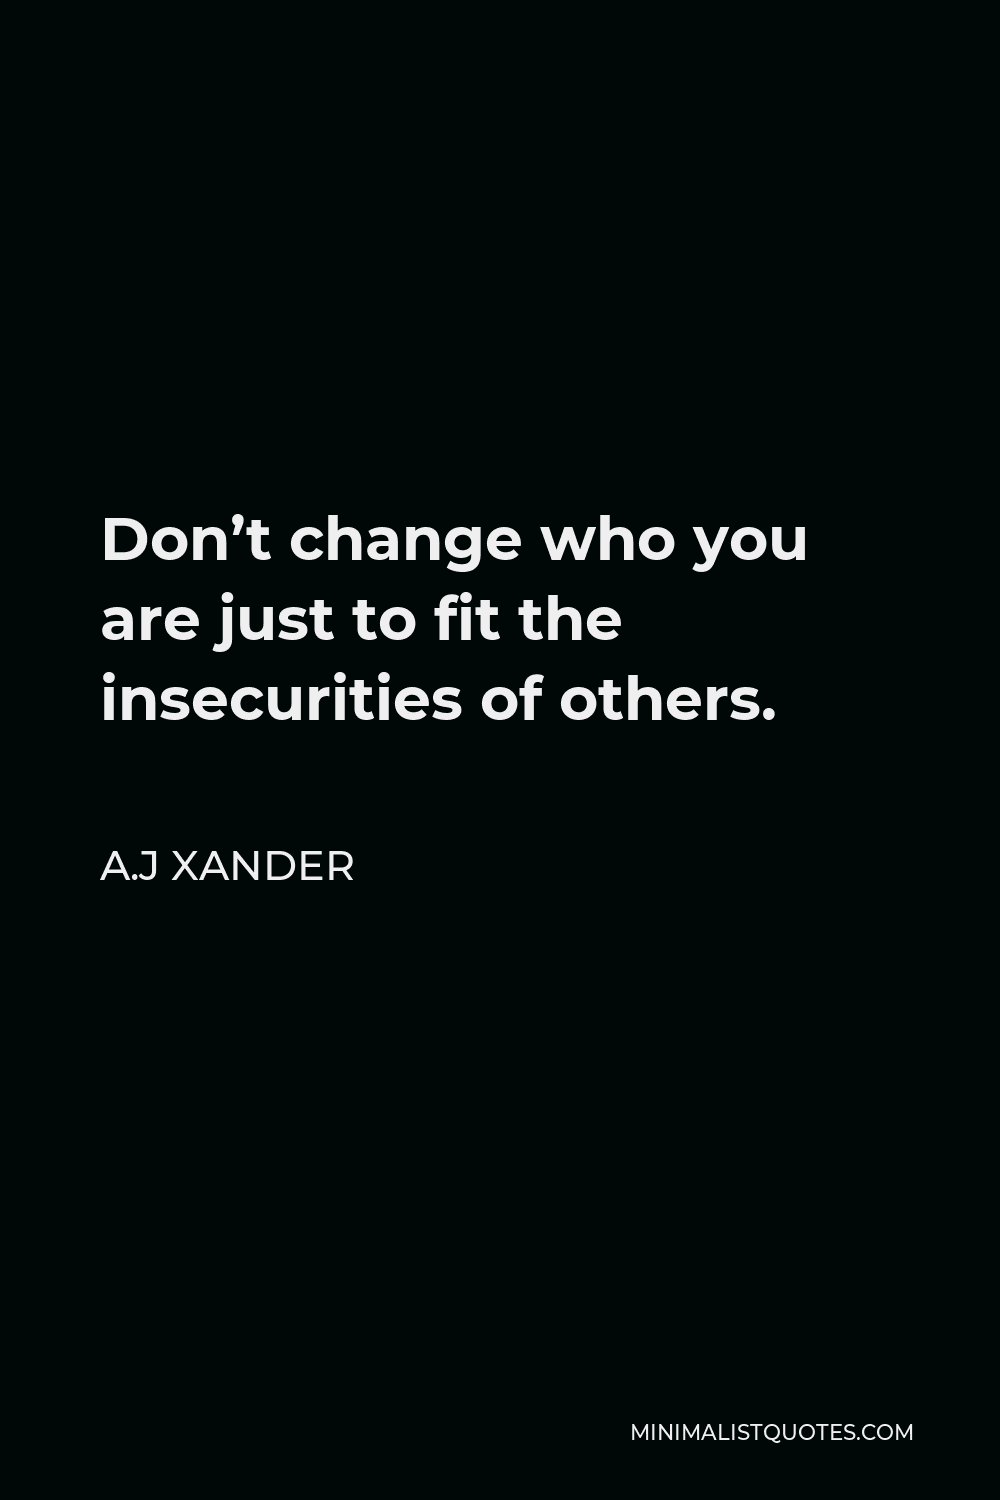 A.J Xander Quote - Don’t change who you are just to fit the insecurities of others.